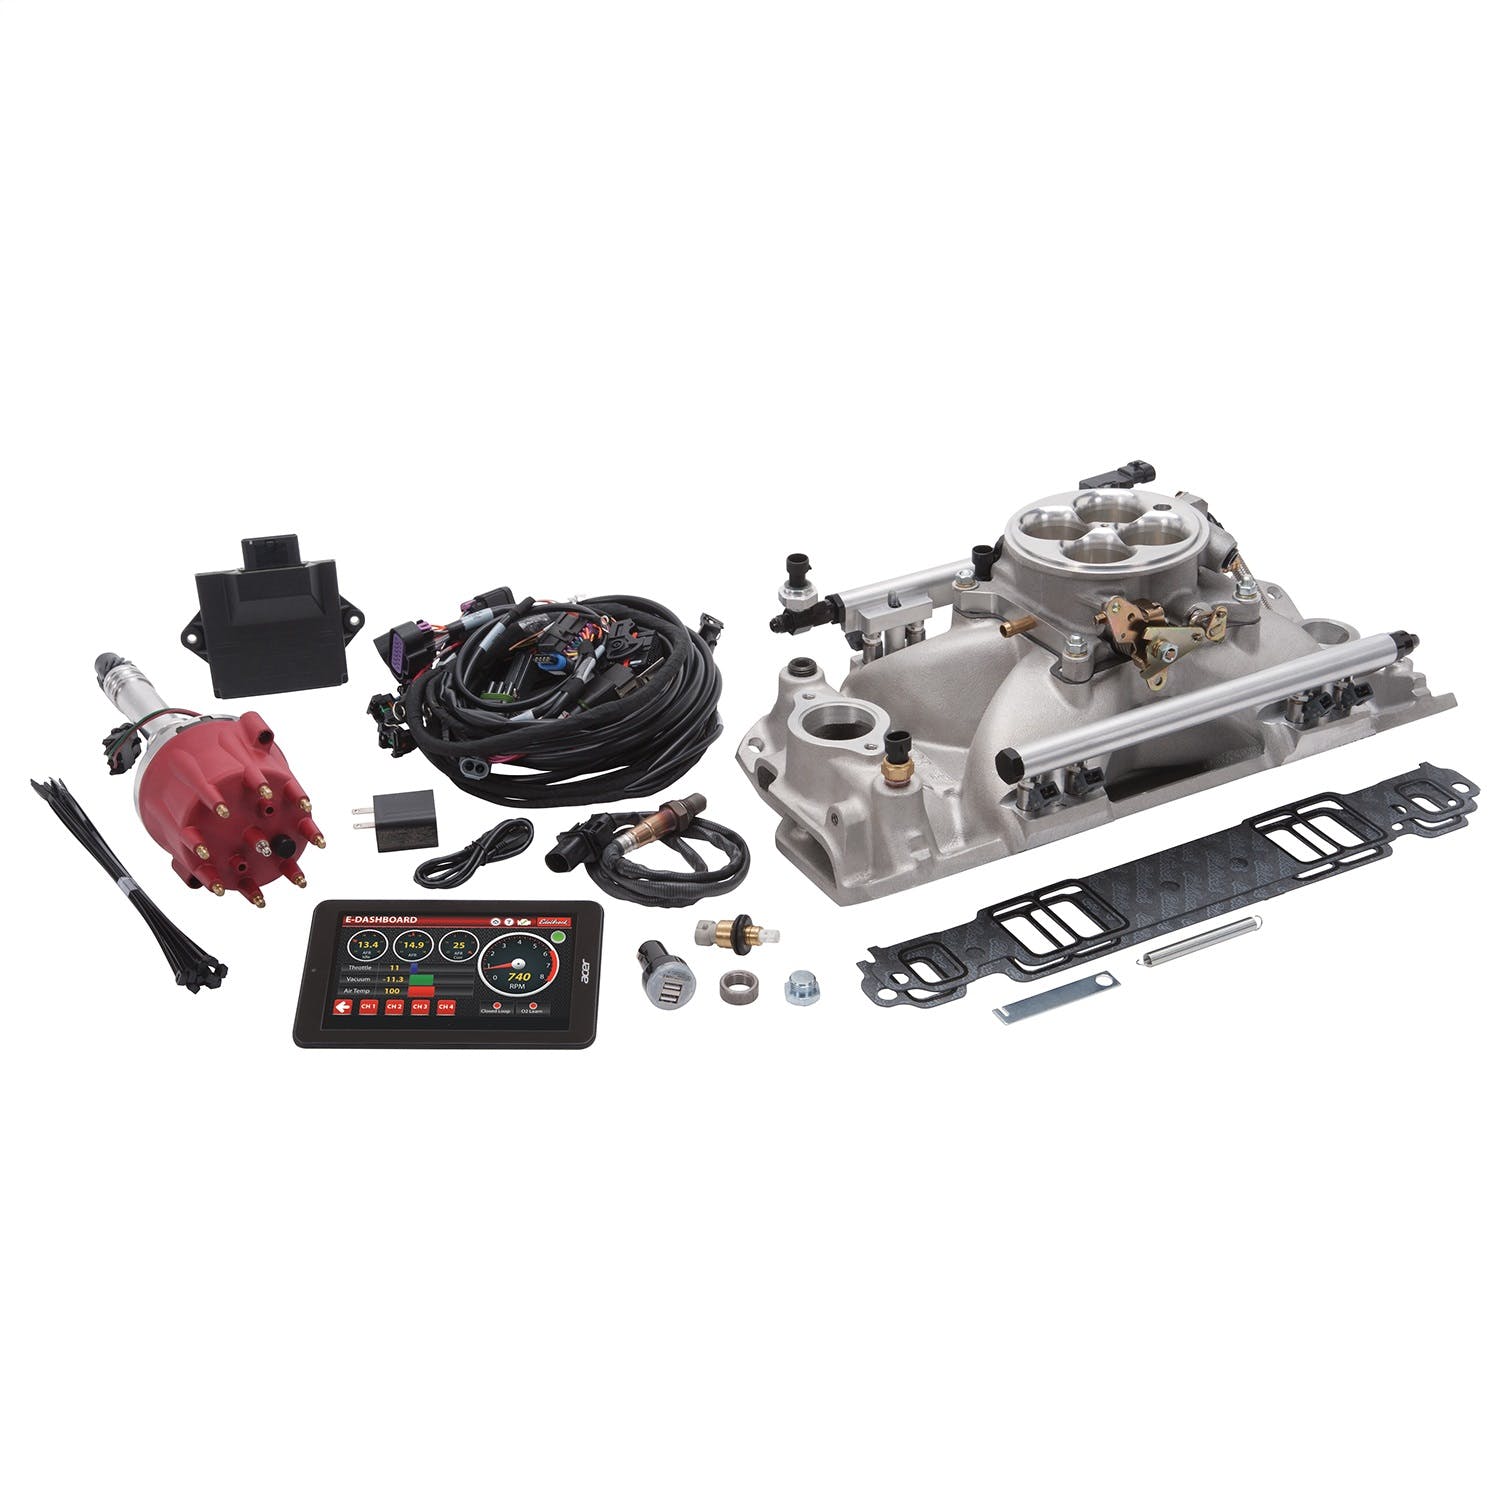 Edelbrock 35760 PRO FLO 4 FUEL INJECTION KIT SBC 1986 and EARLIER 450 HP Max